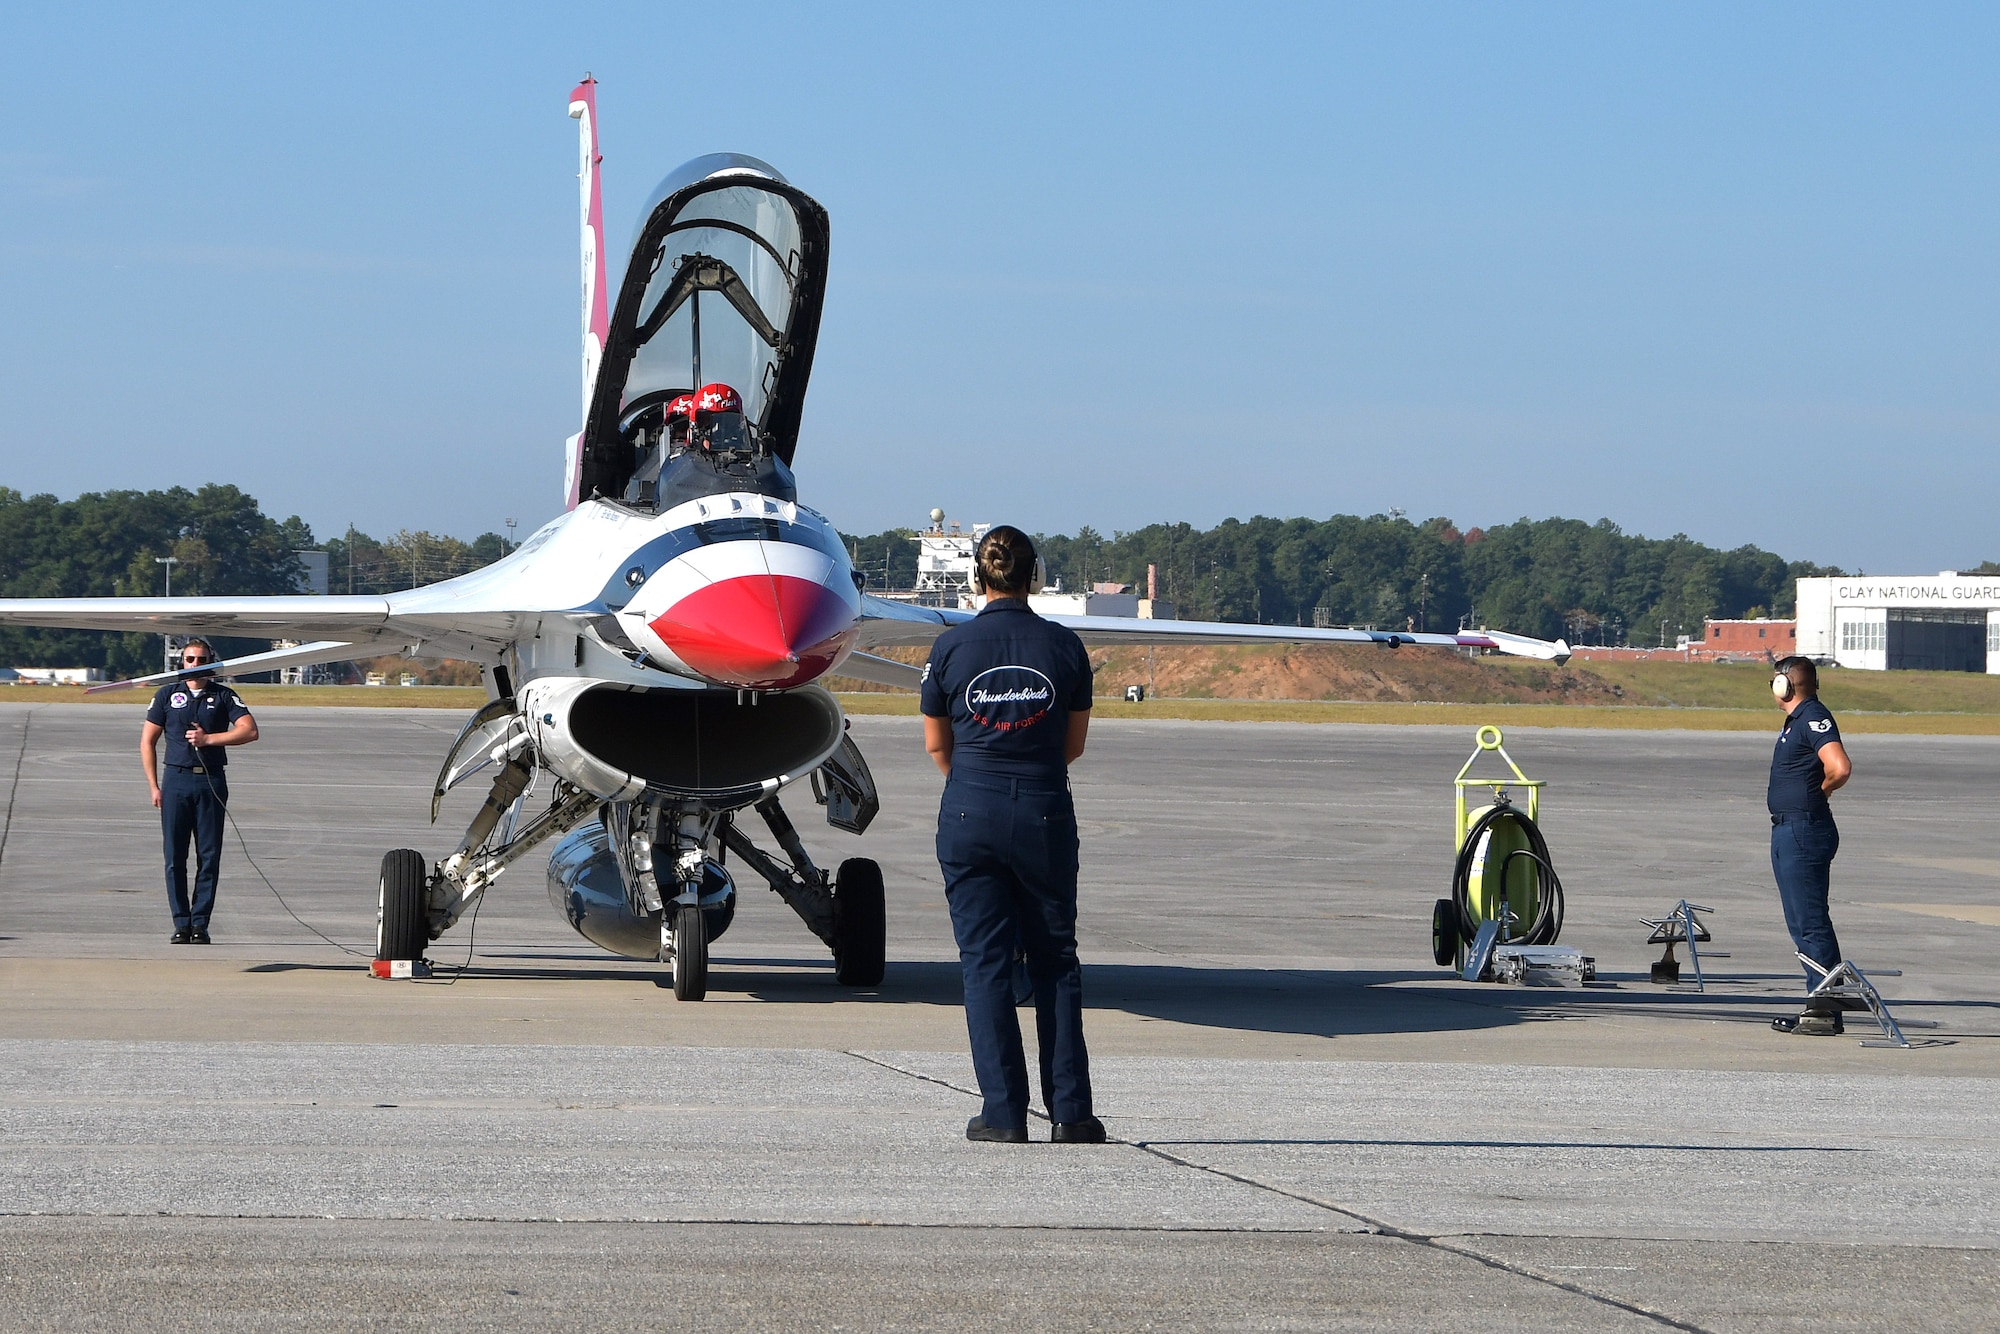 U.S. Air Force Thunderbirds aircrew conduct pre-flight checks at Dobbins Air Reserve Base, Ga. on Oct. 11, 2019. Tracey Pendley, this year's Georgia Teacher of the Year and Hometown Hero, flew with the Thunderbirds. (U.S. Air Force photo/Airman Kendra A. Ransum)